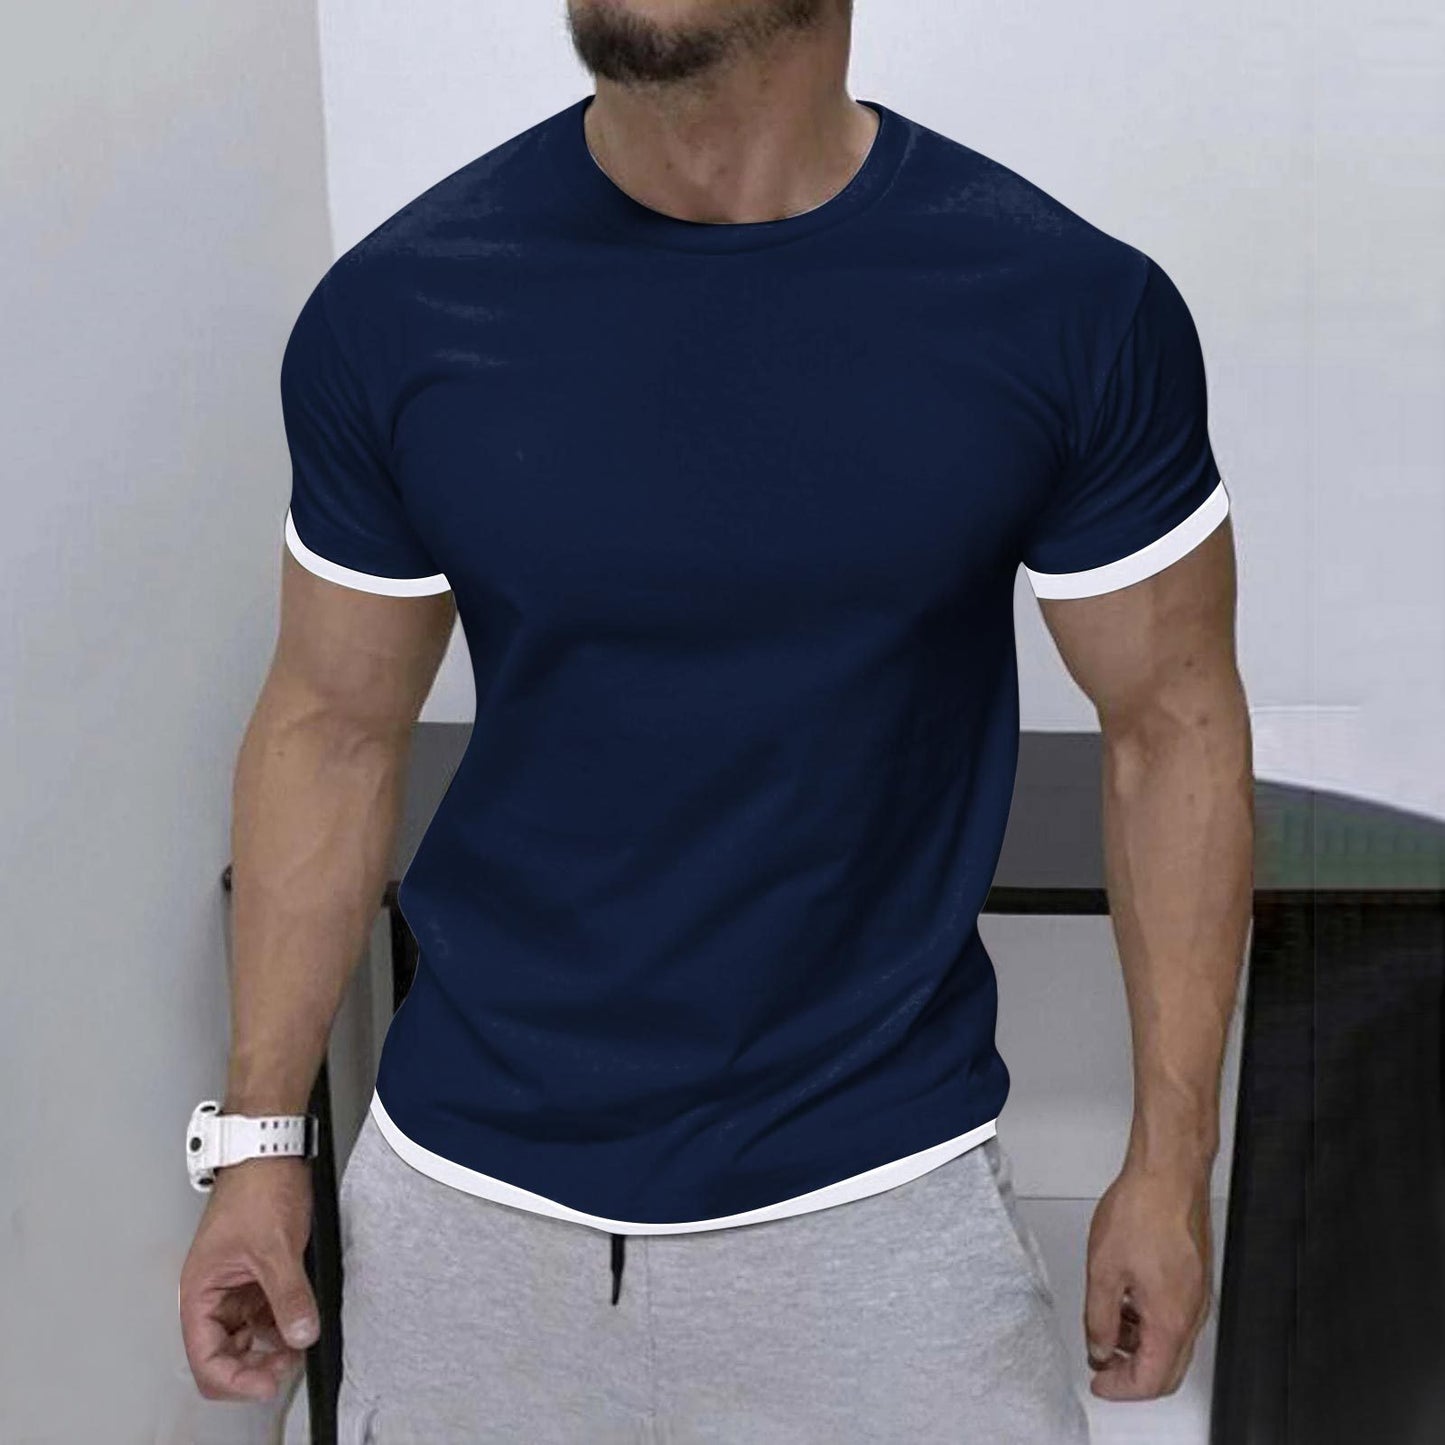 Fitness Sports Men's T-shirt for Optimal Comfort and Performance